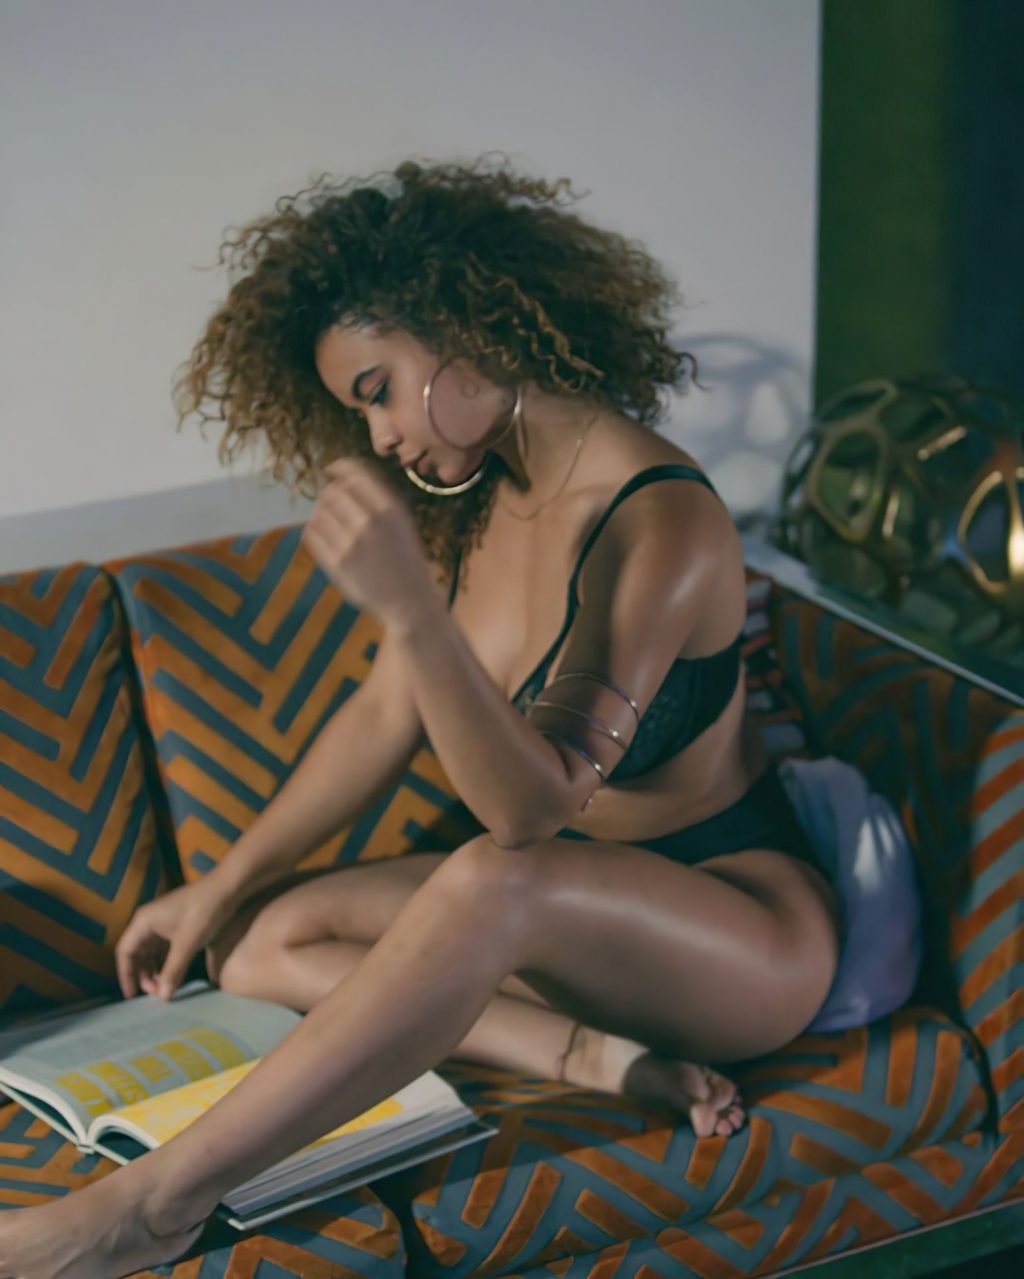 Crystal Westbrooks Shows Off Her Big Boobs in Lingerie (15 Photos)